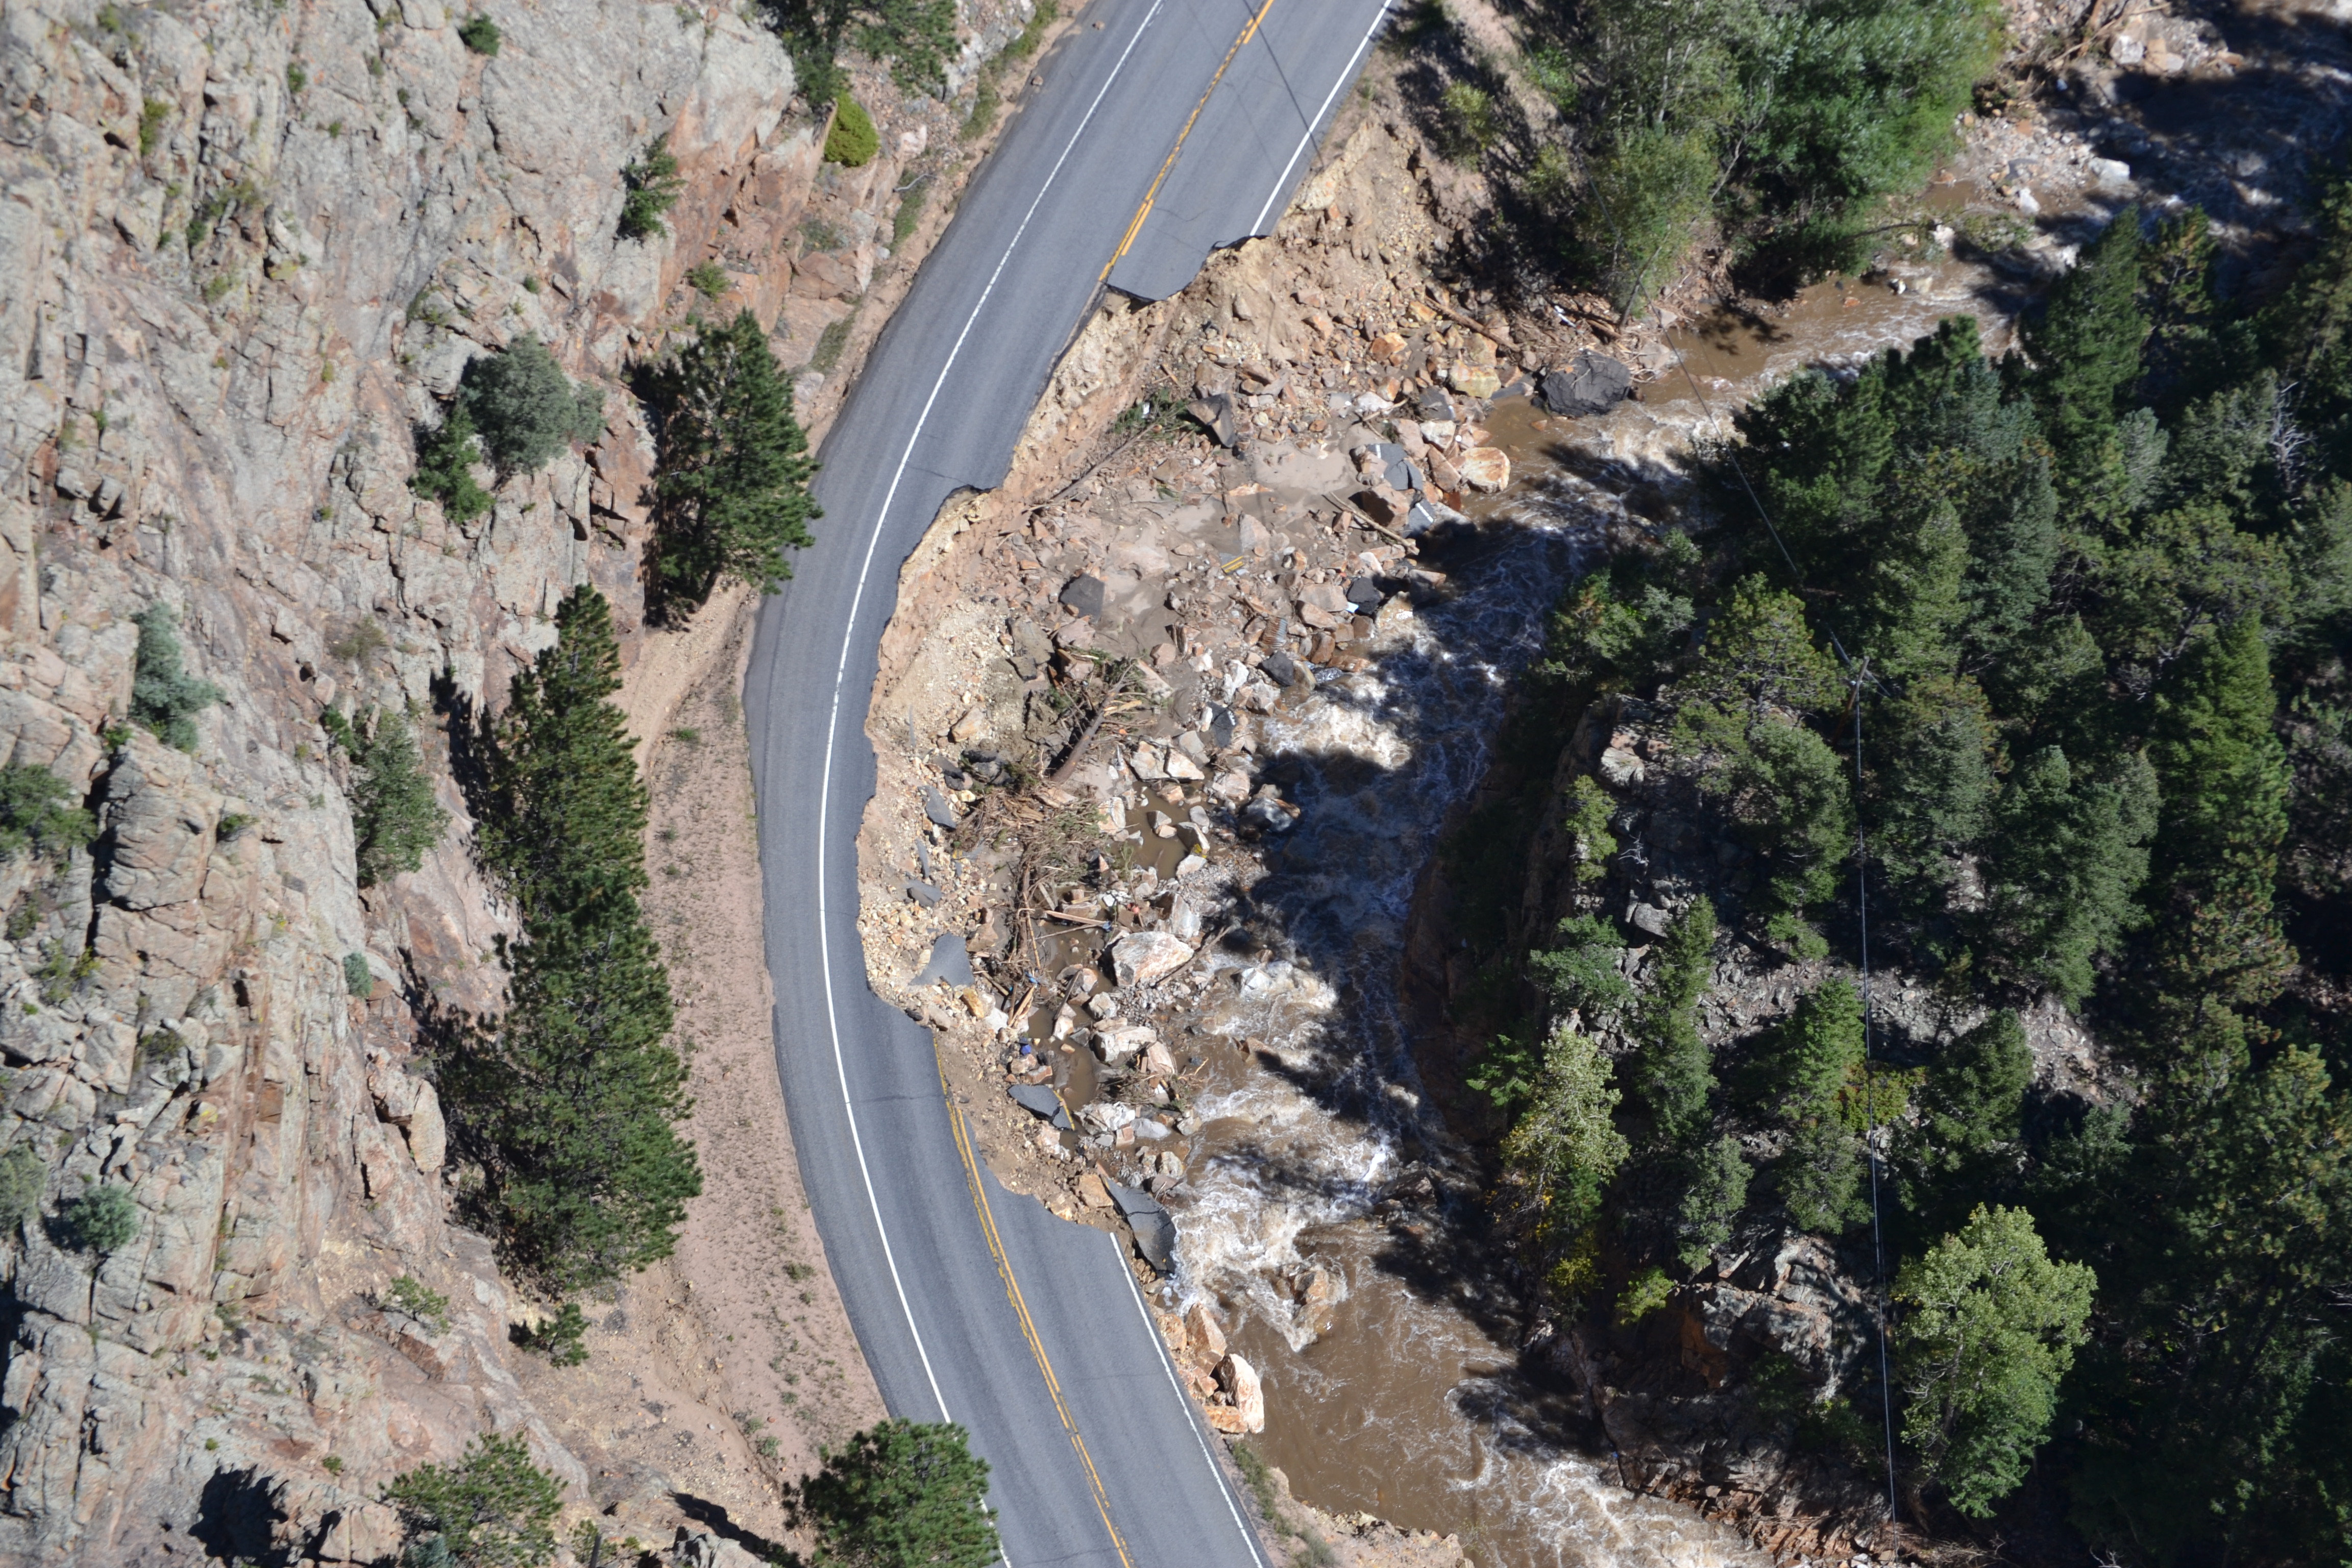 Flood damages James Canyon sustained during the 2013 event